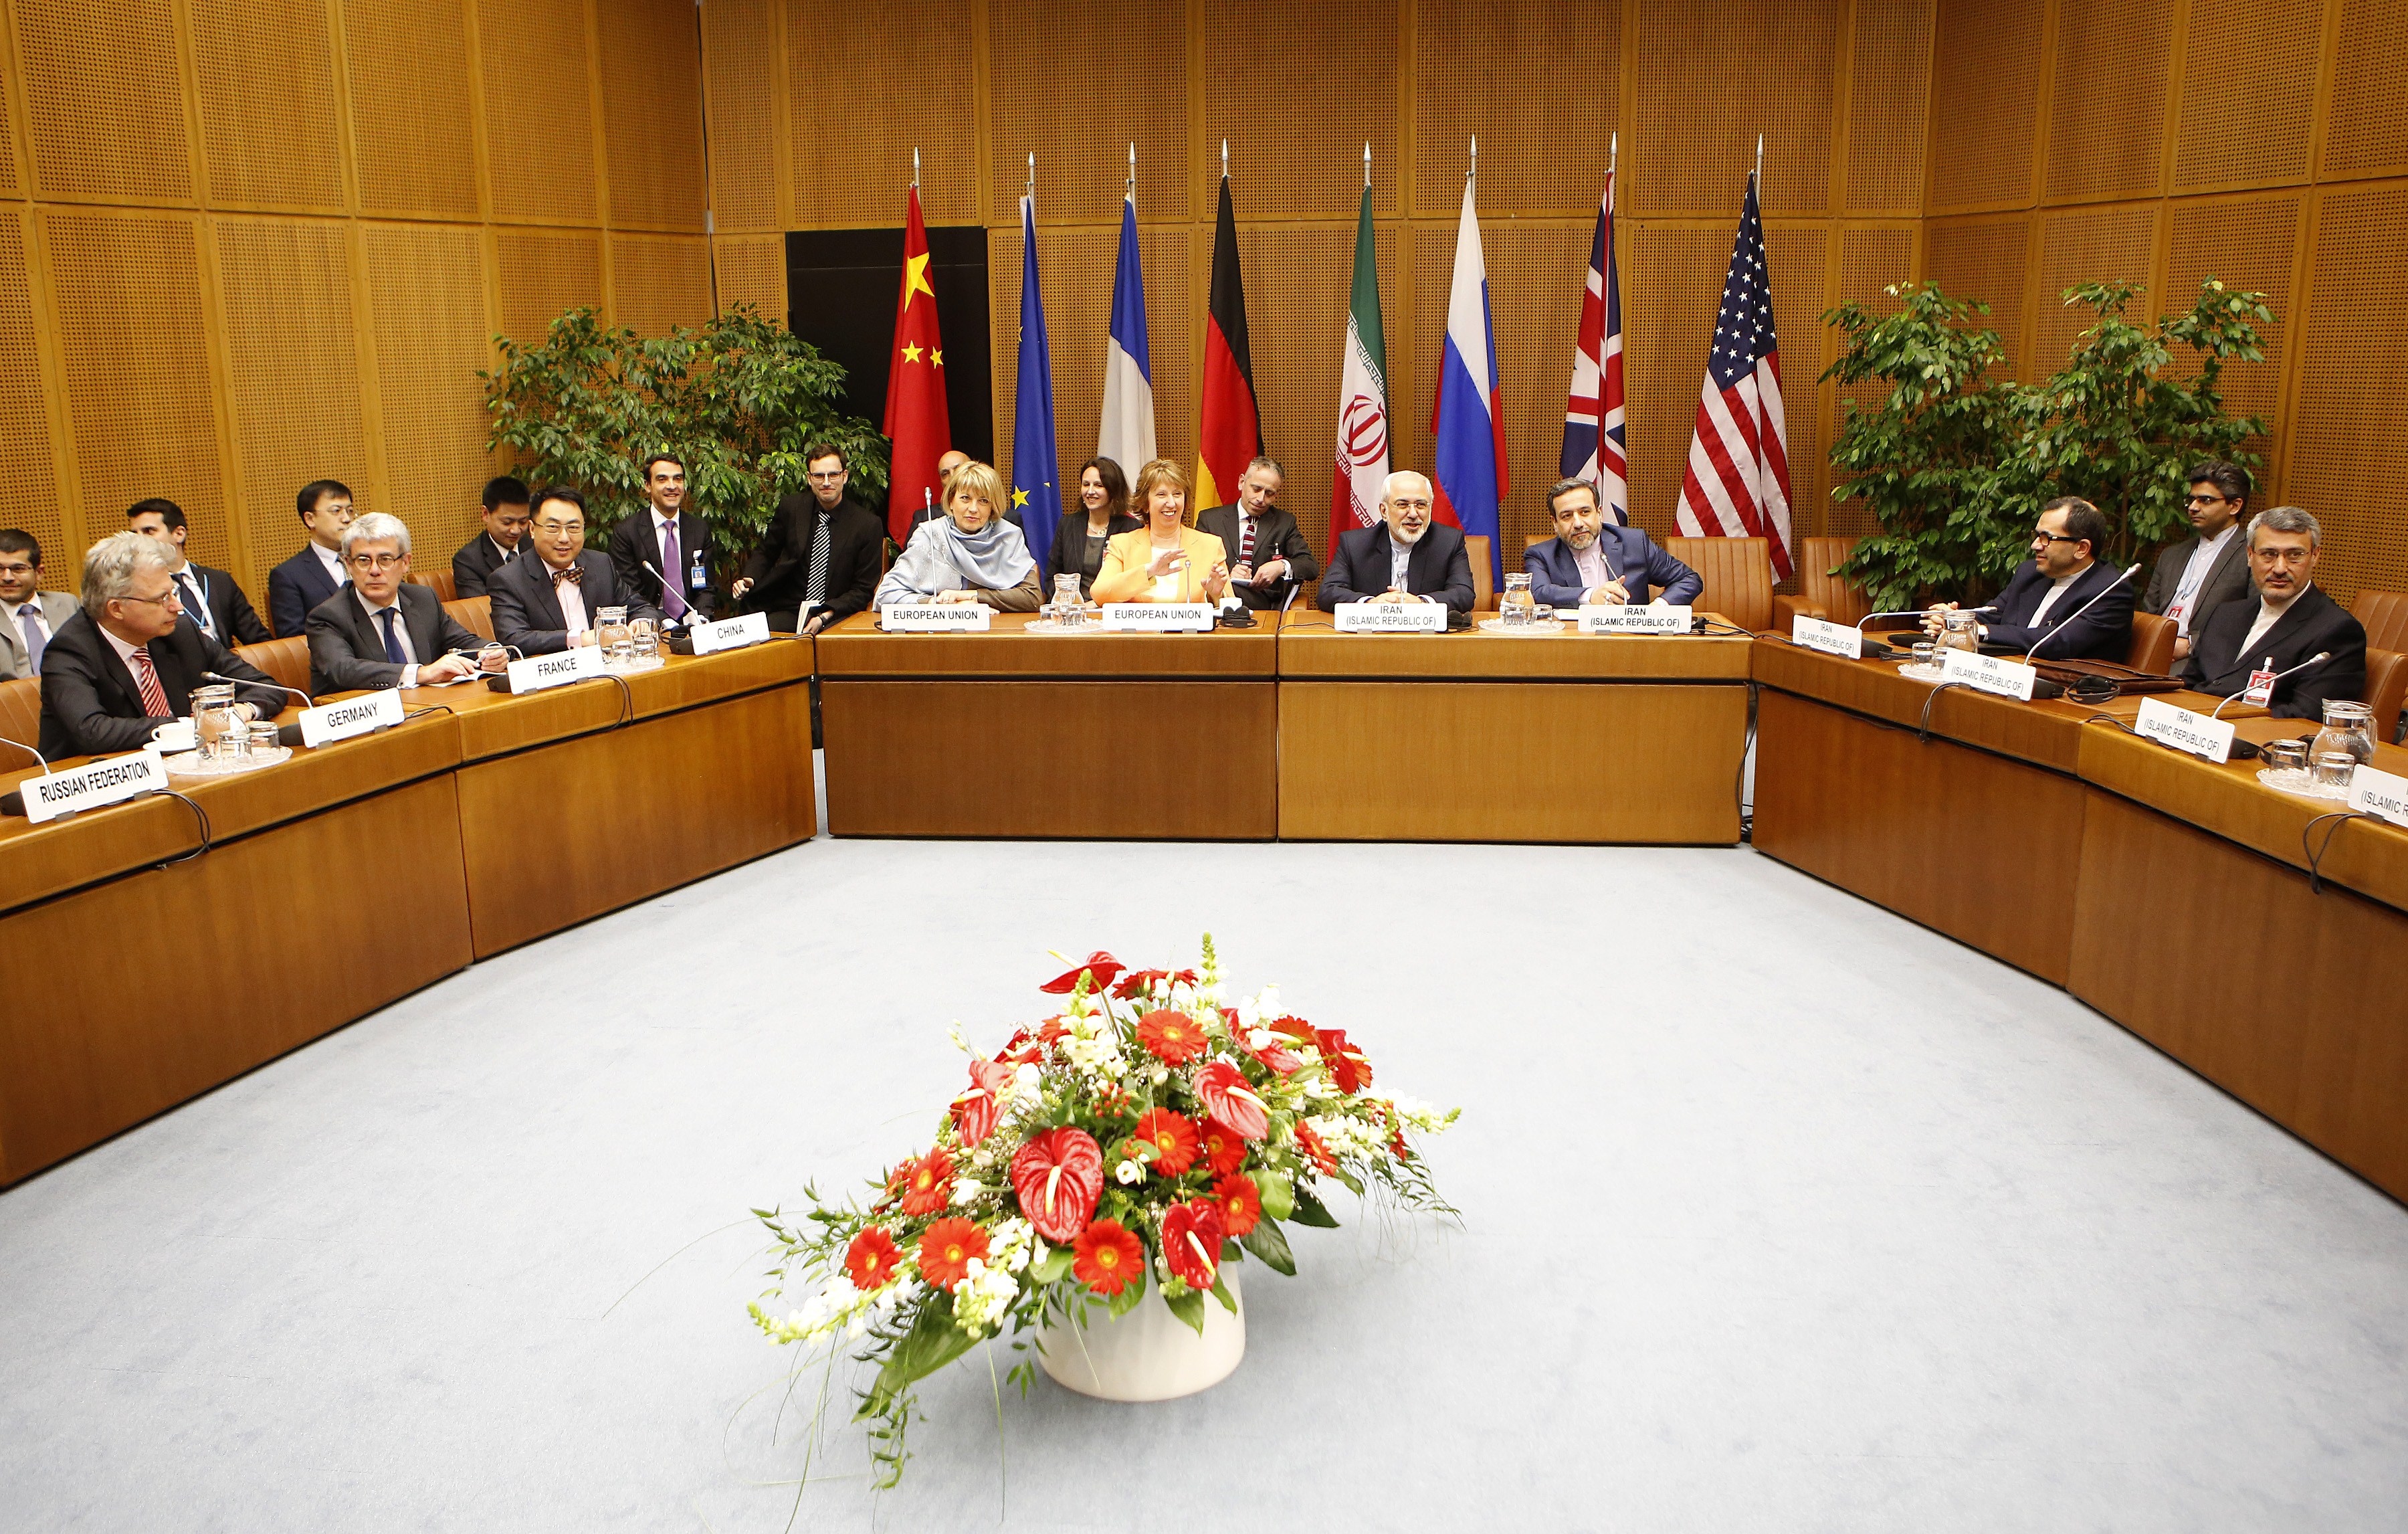 E.U. foreign-affairs representative Catherine Ashton, center left, and Iranian Foreign Minister Mohammad Javad Zarif, center right, attend the second day of the second round of nuclear talks with Iran at the U.N. headquarters in Vienna on March 19, 2014 (DIETER NAGL&mdash;AFP/Getty Images)